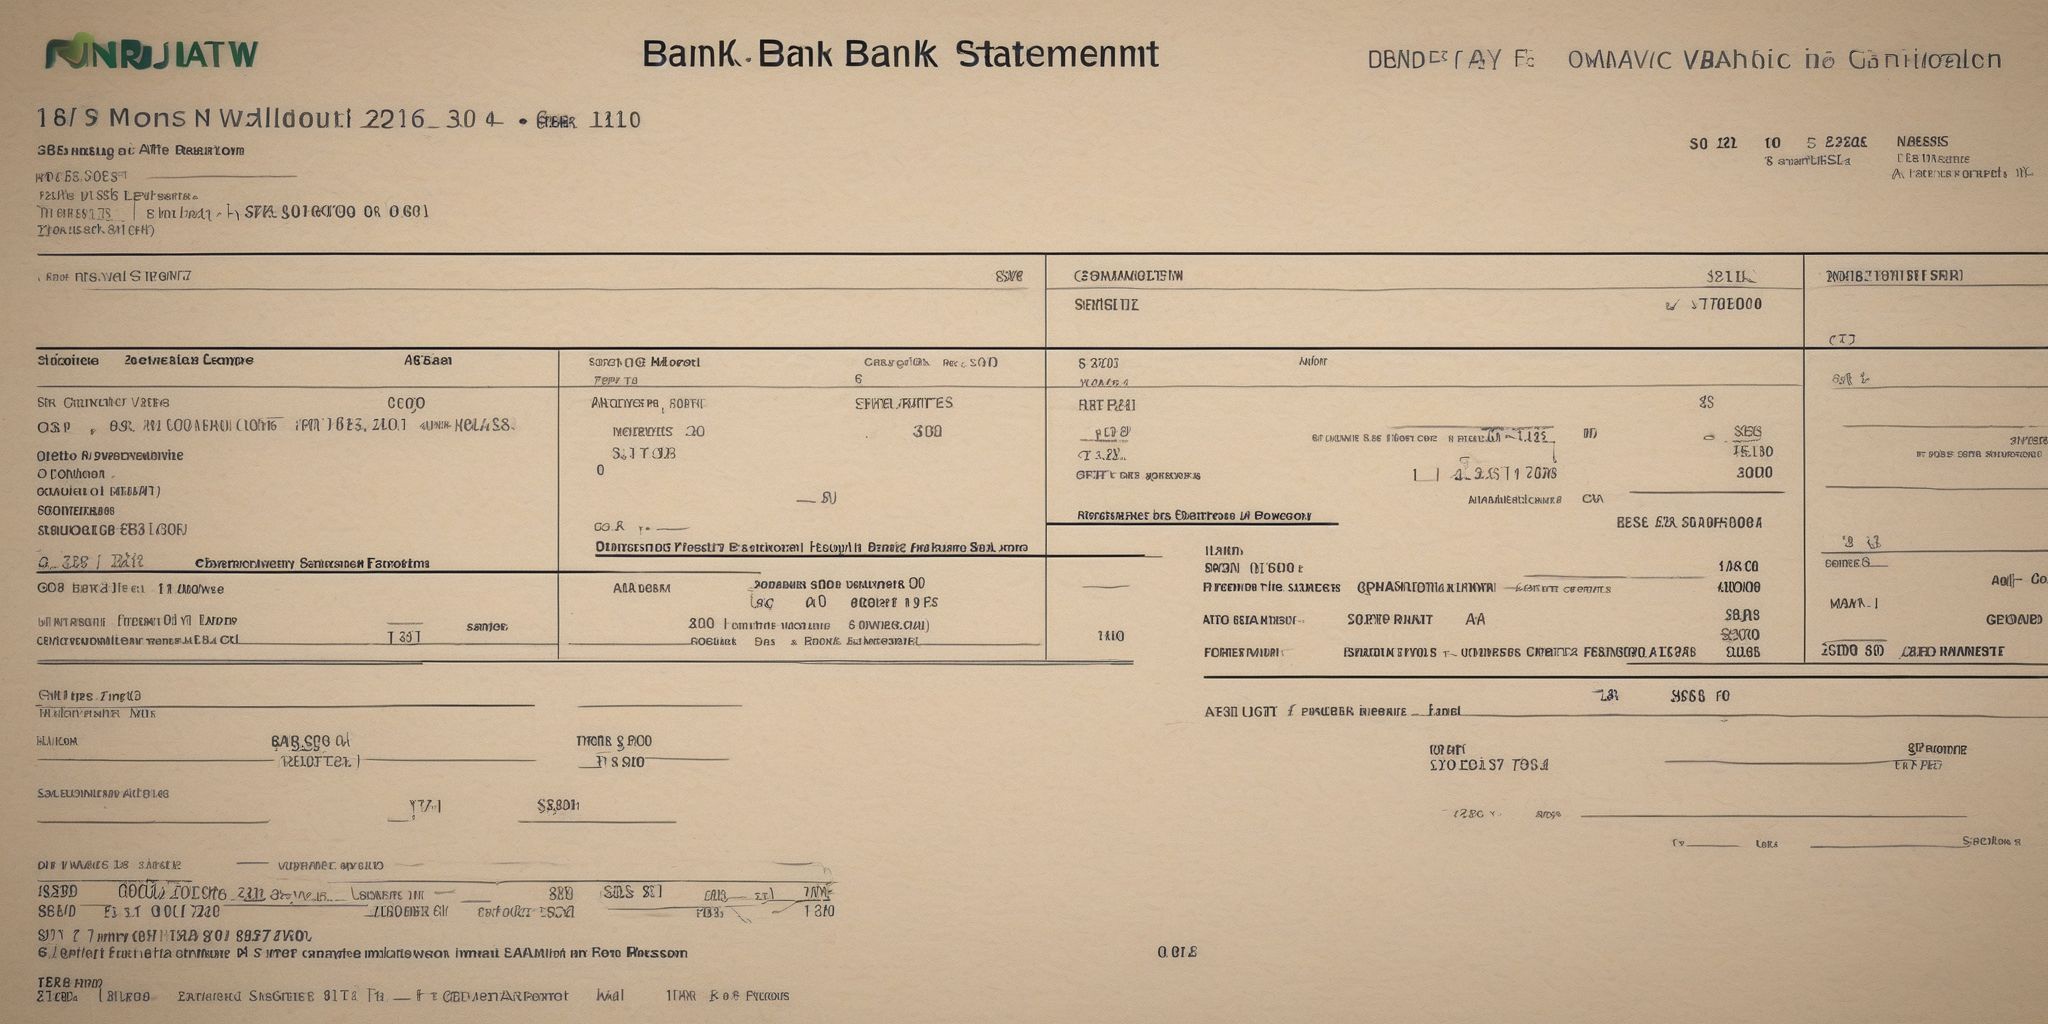 Bank statement  in realistic, photographic style